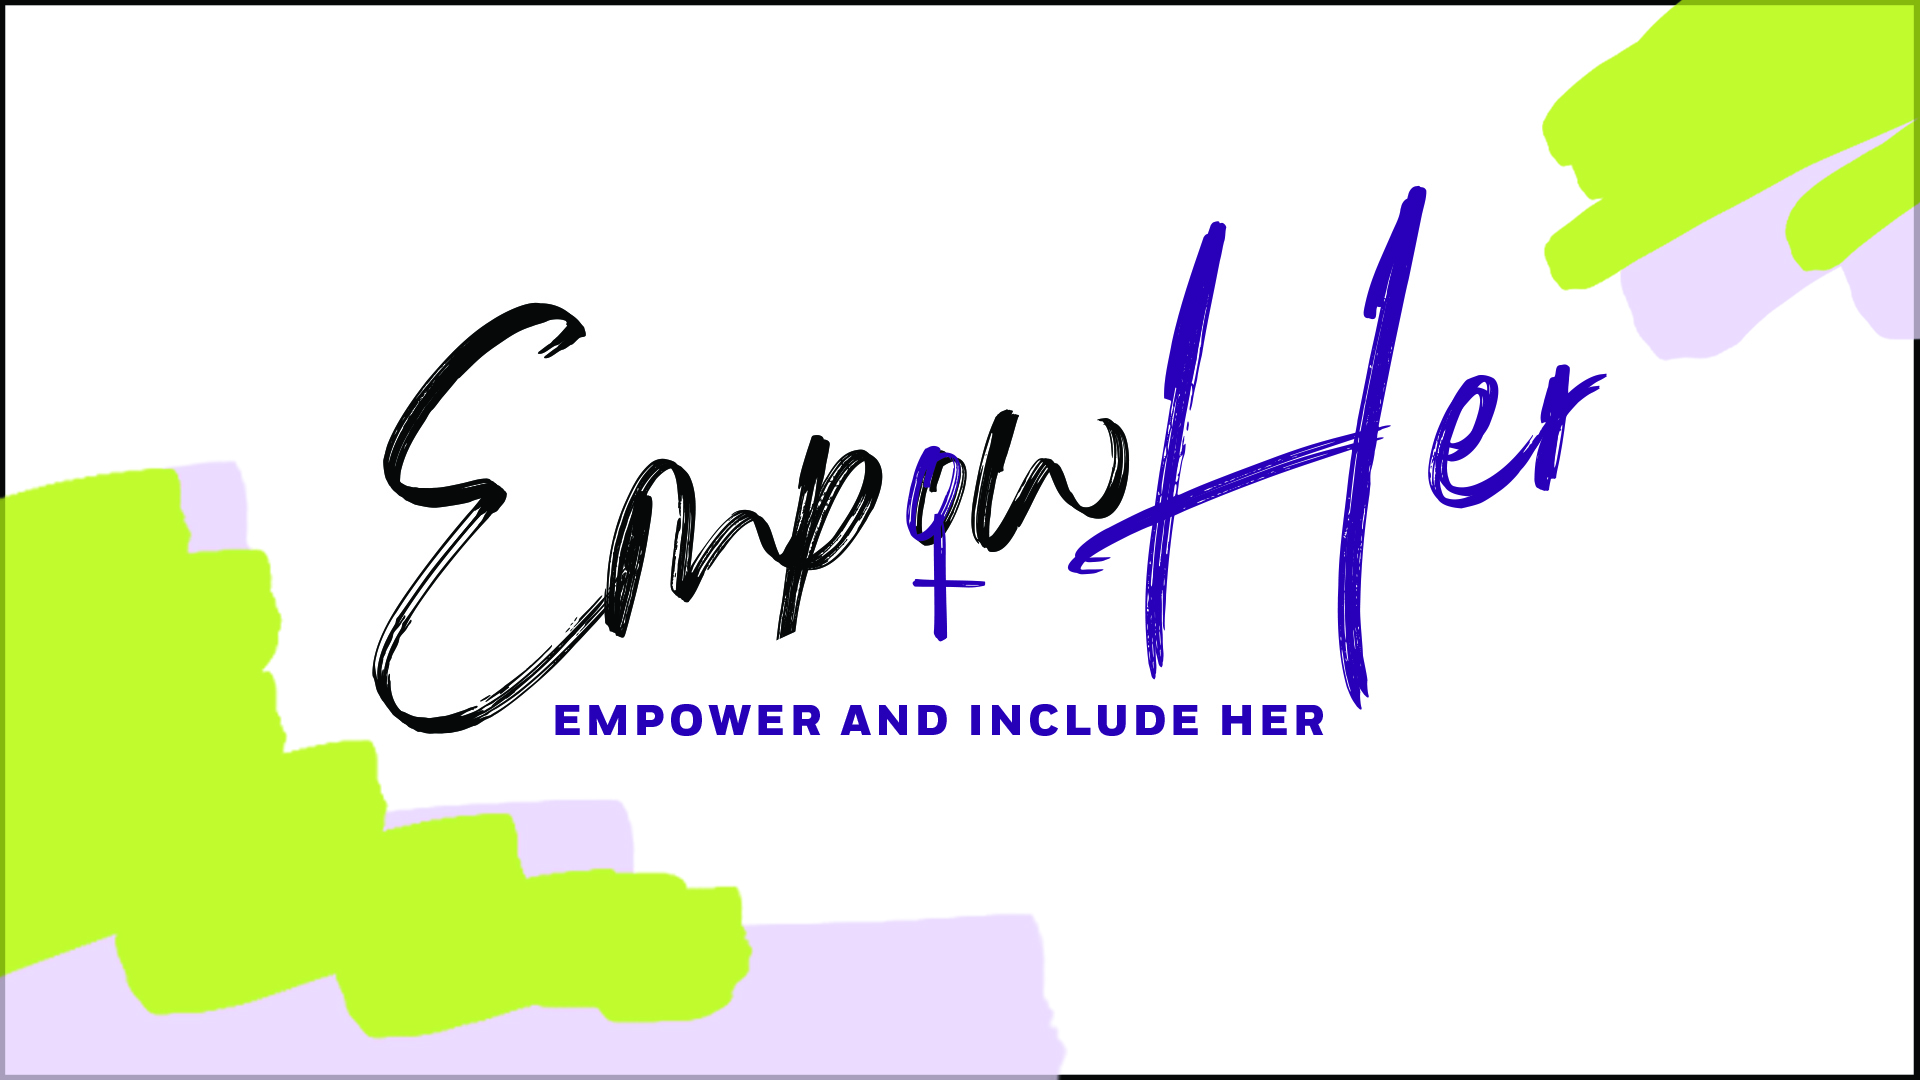 EmpowHer Empower and Include Her is the theme for Women's History Month at Baruch